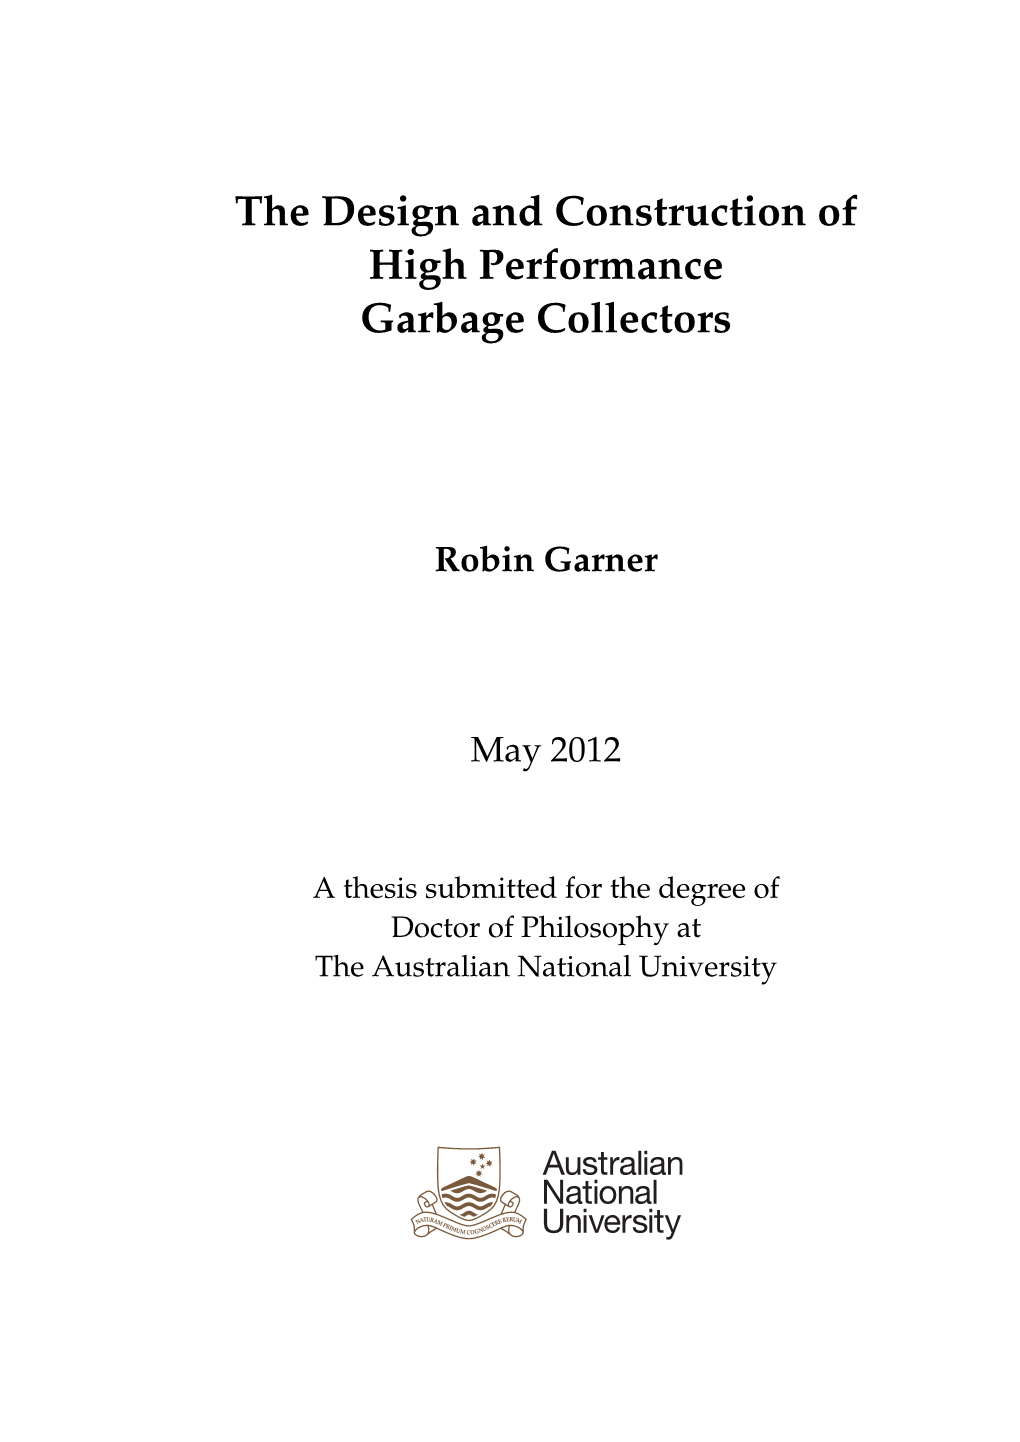 The Design and Construction of High Performance Garbage Collectors